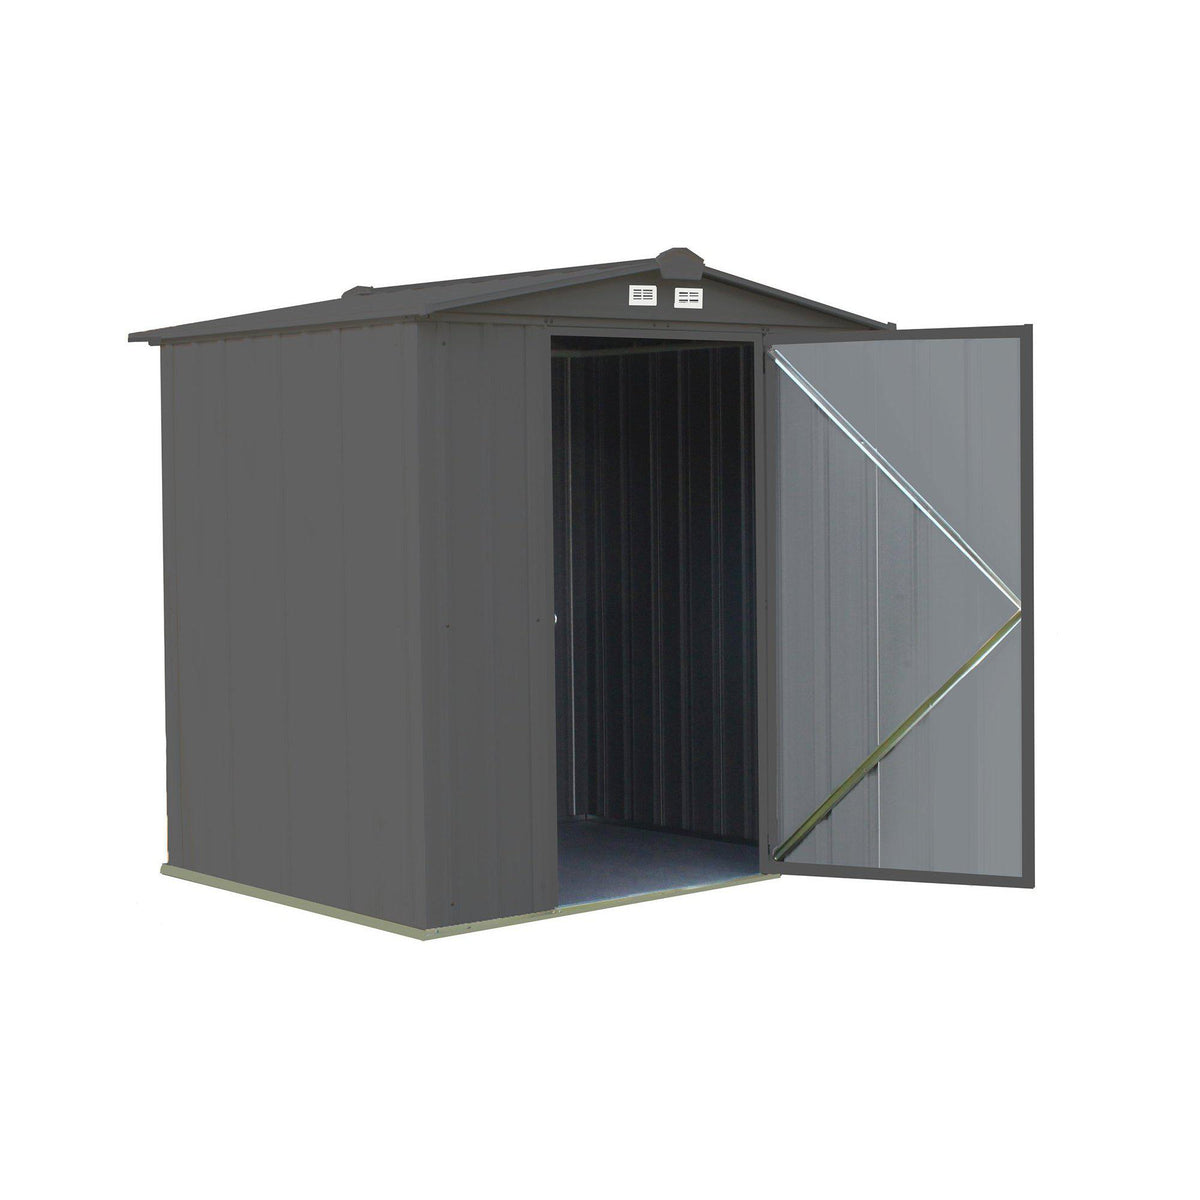 Arrow EZEE Shed Low Gable Steel Storage Shed, Charcoal, 6 x 5 ft.